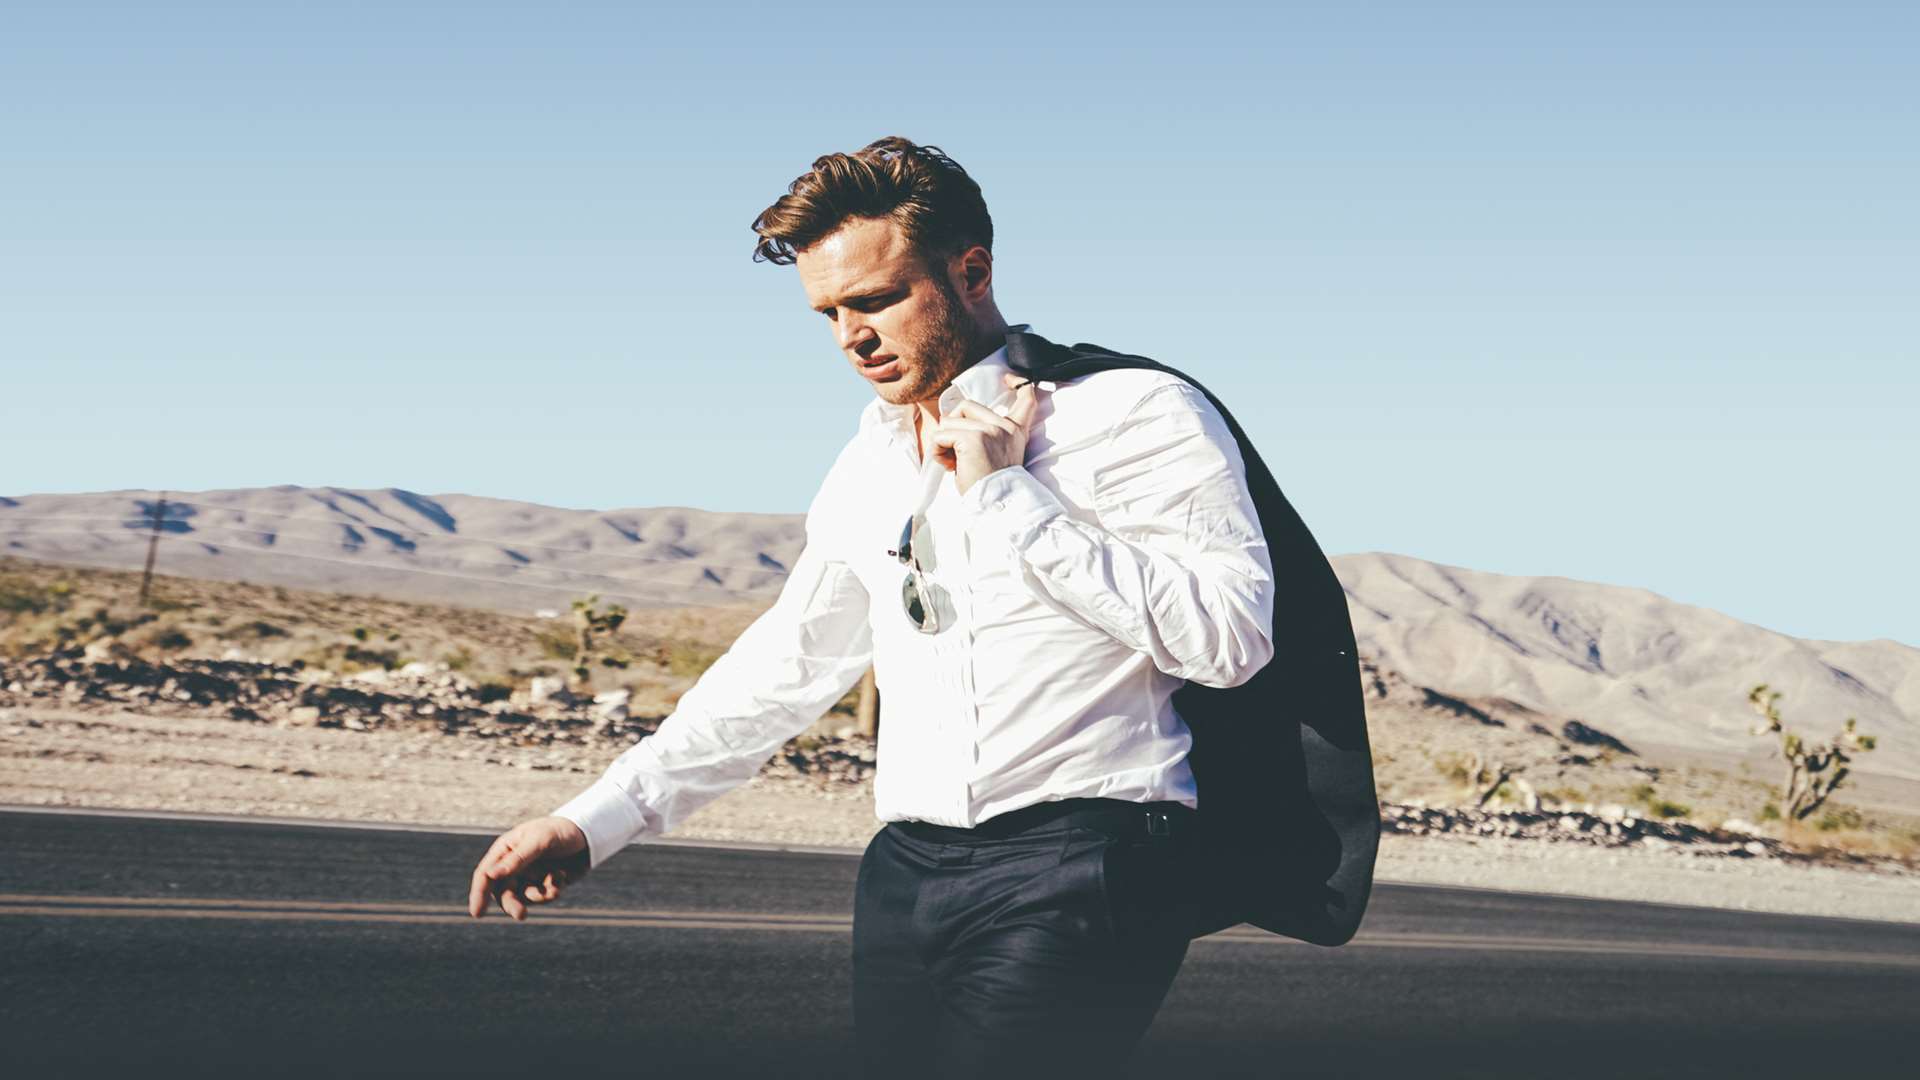 Olly Murs will play in Kent next summer